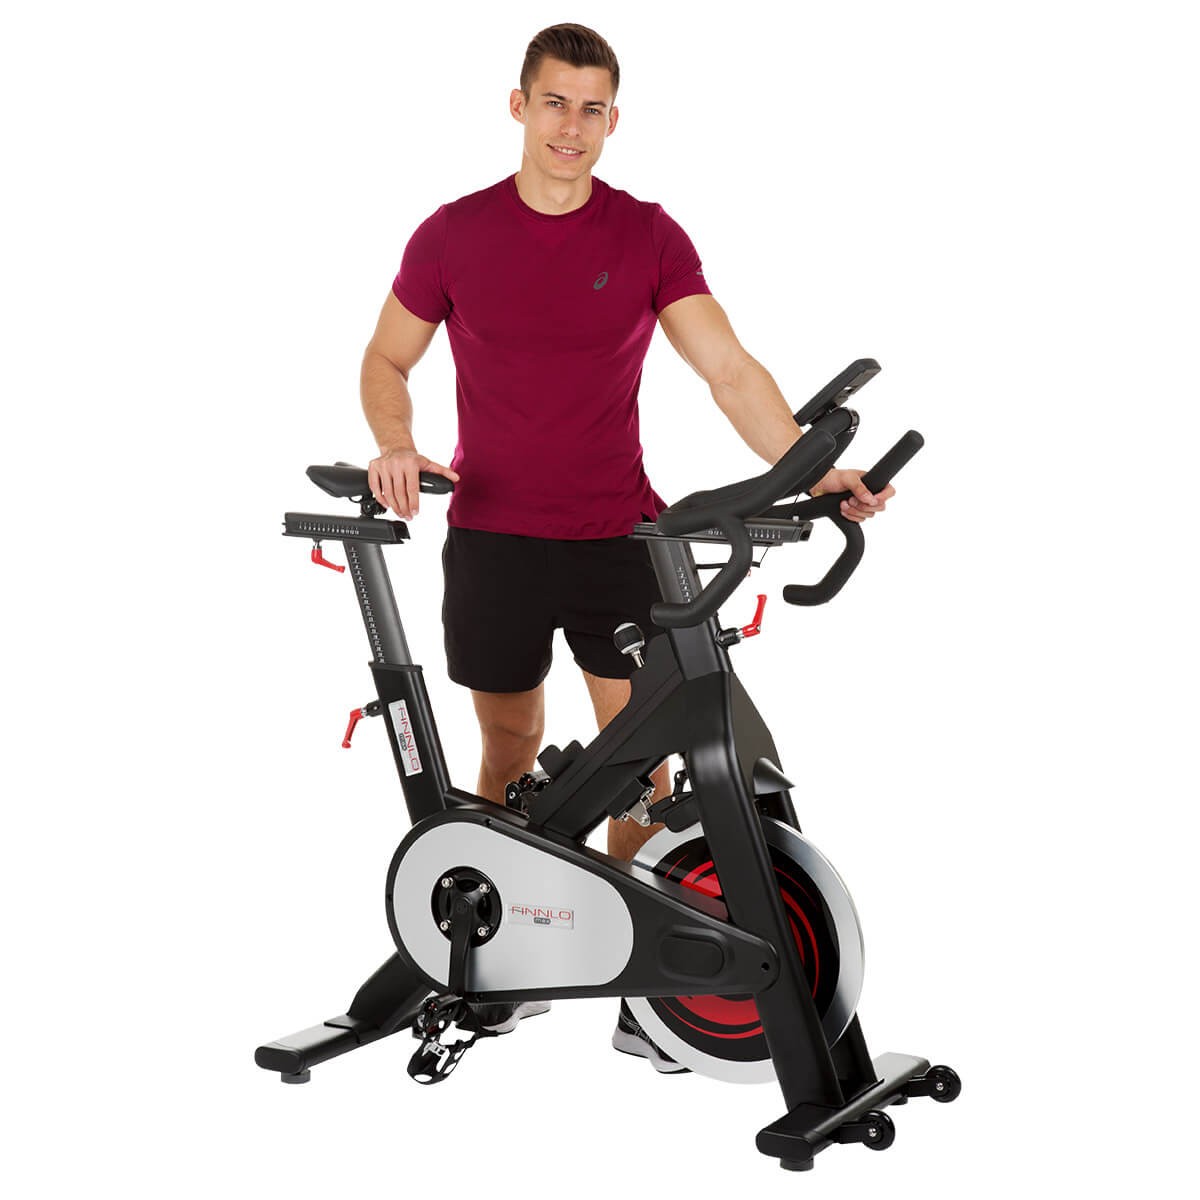 Pro Bicycle Cycling Fitness Gym Exercise Stationary Bike Cardio Workout Indoor 